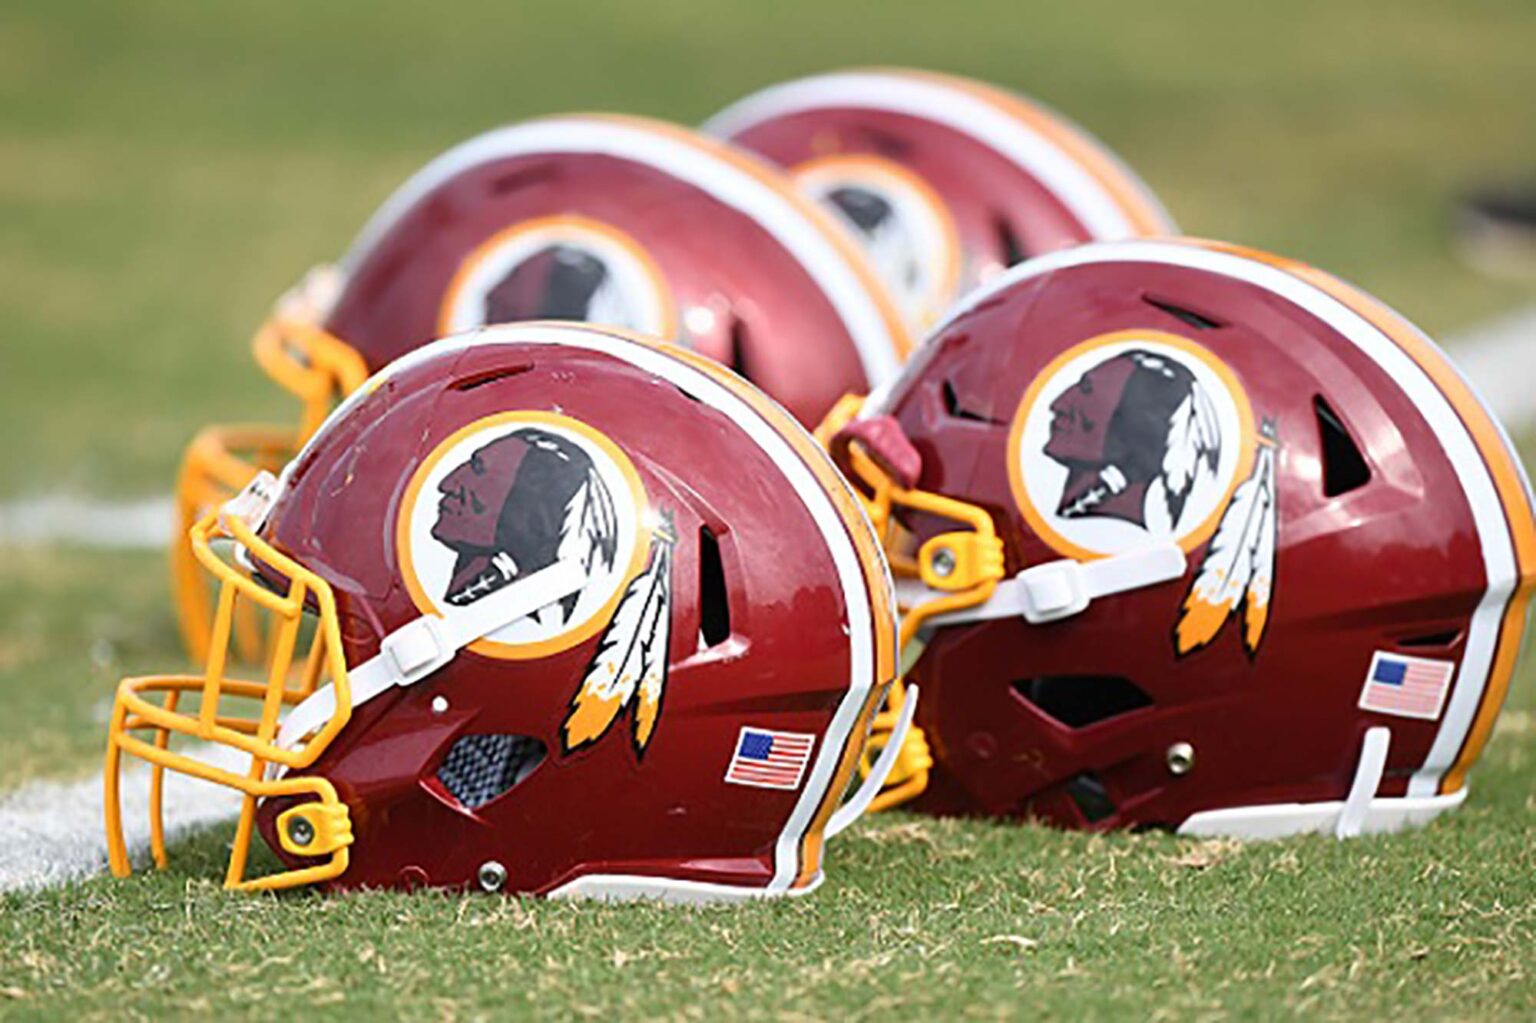 Recent news has shed light on inappropriate conduct amongst the Washington Redskins. Here's the scandal unwrapped.